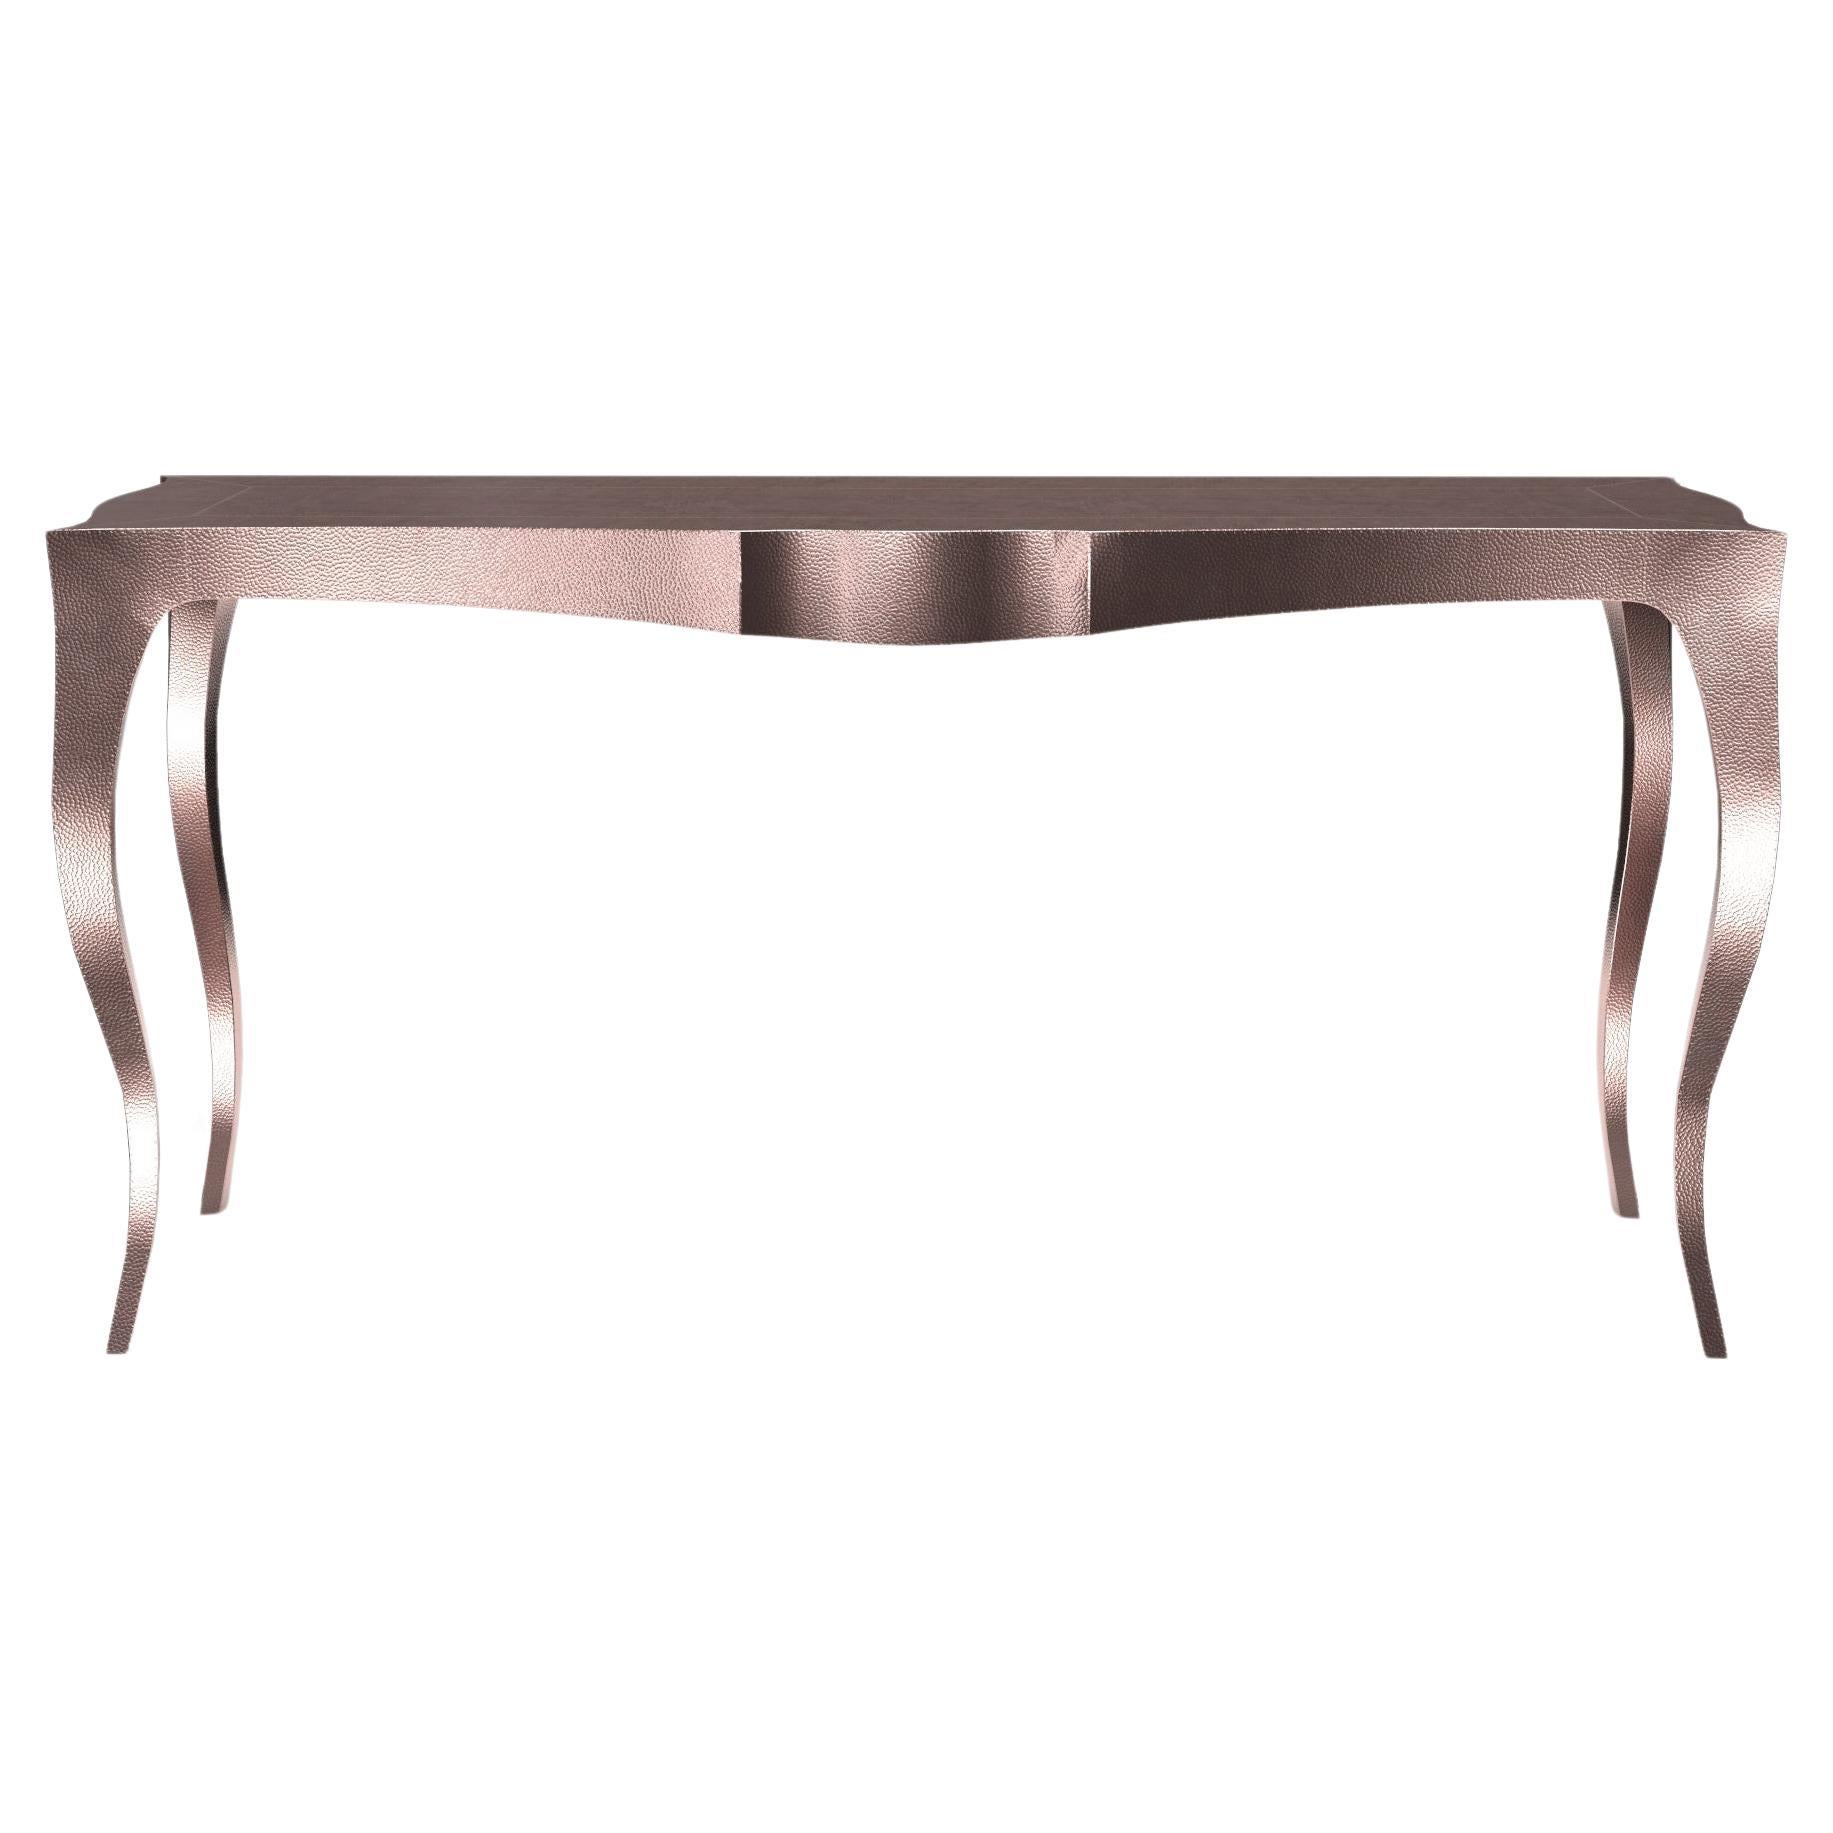 Louise Console Art Deco Center Tables Mid. Hammered Copper by Paul Mathieu